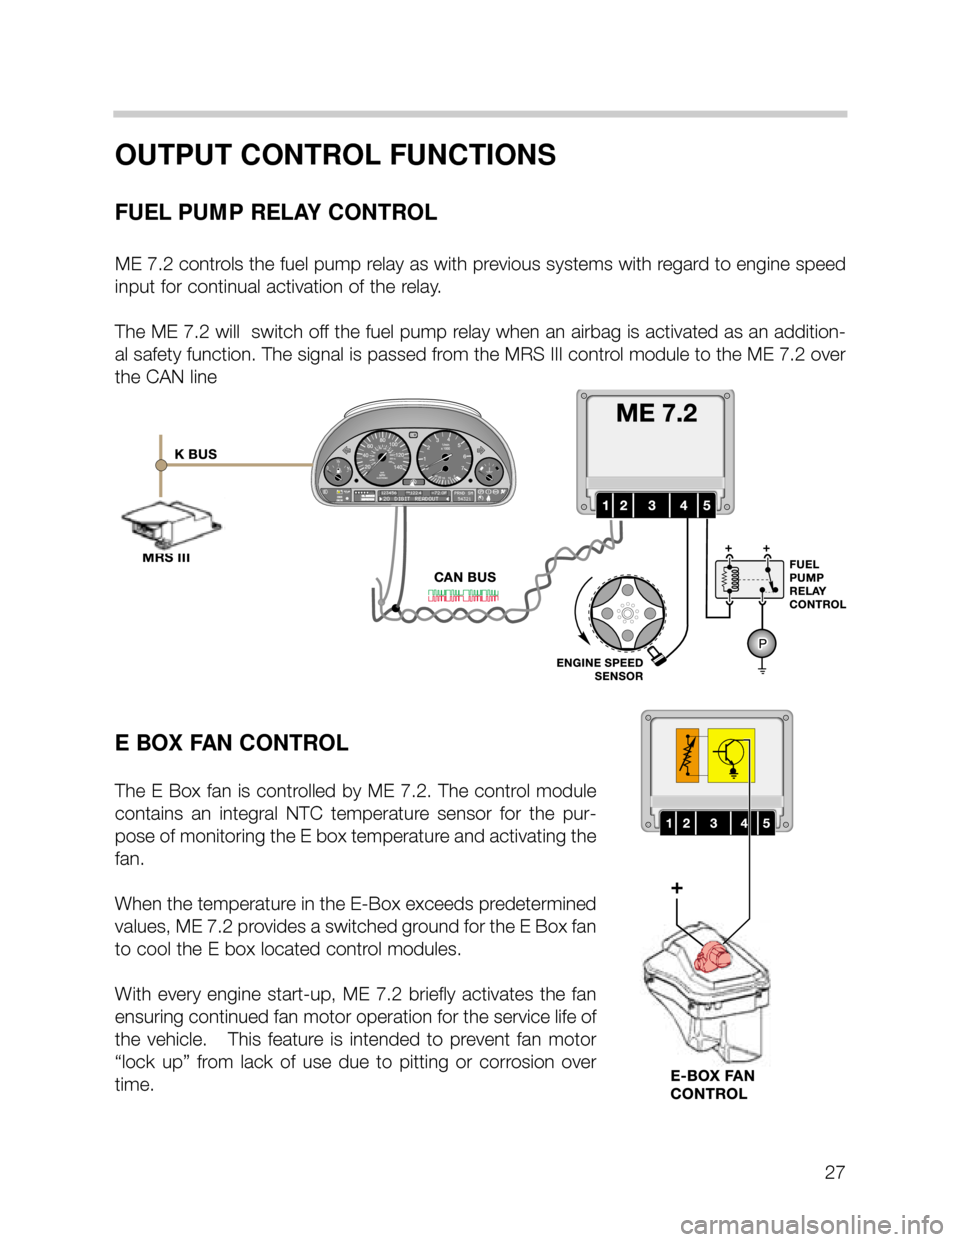 BMW X5 2003 E53 M62TU Engine Workshop Manual 27
OUTPUT CONTROL FUNCTIONS
FUEL PUMP RELAY CONTROL
ME 7.2 controls the fuel pump relay as with previous systems with regard to engine speed
input for continual activation of the relay.  
The ME 7.2 w